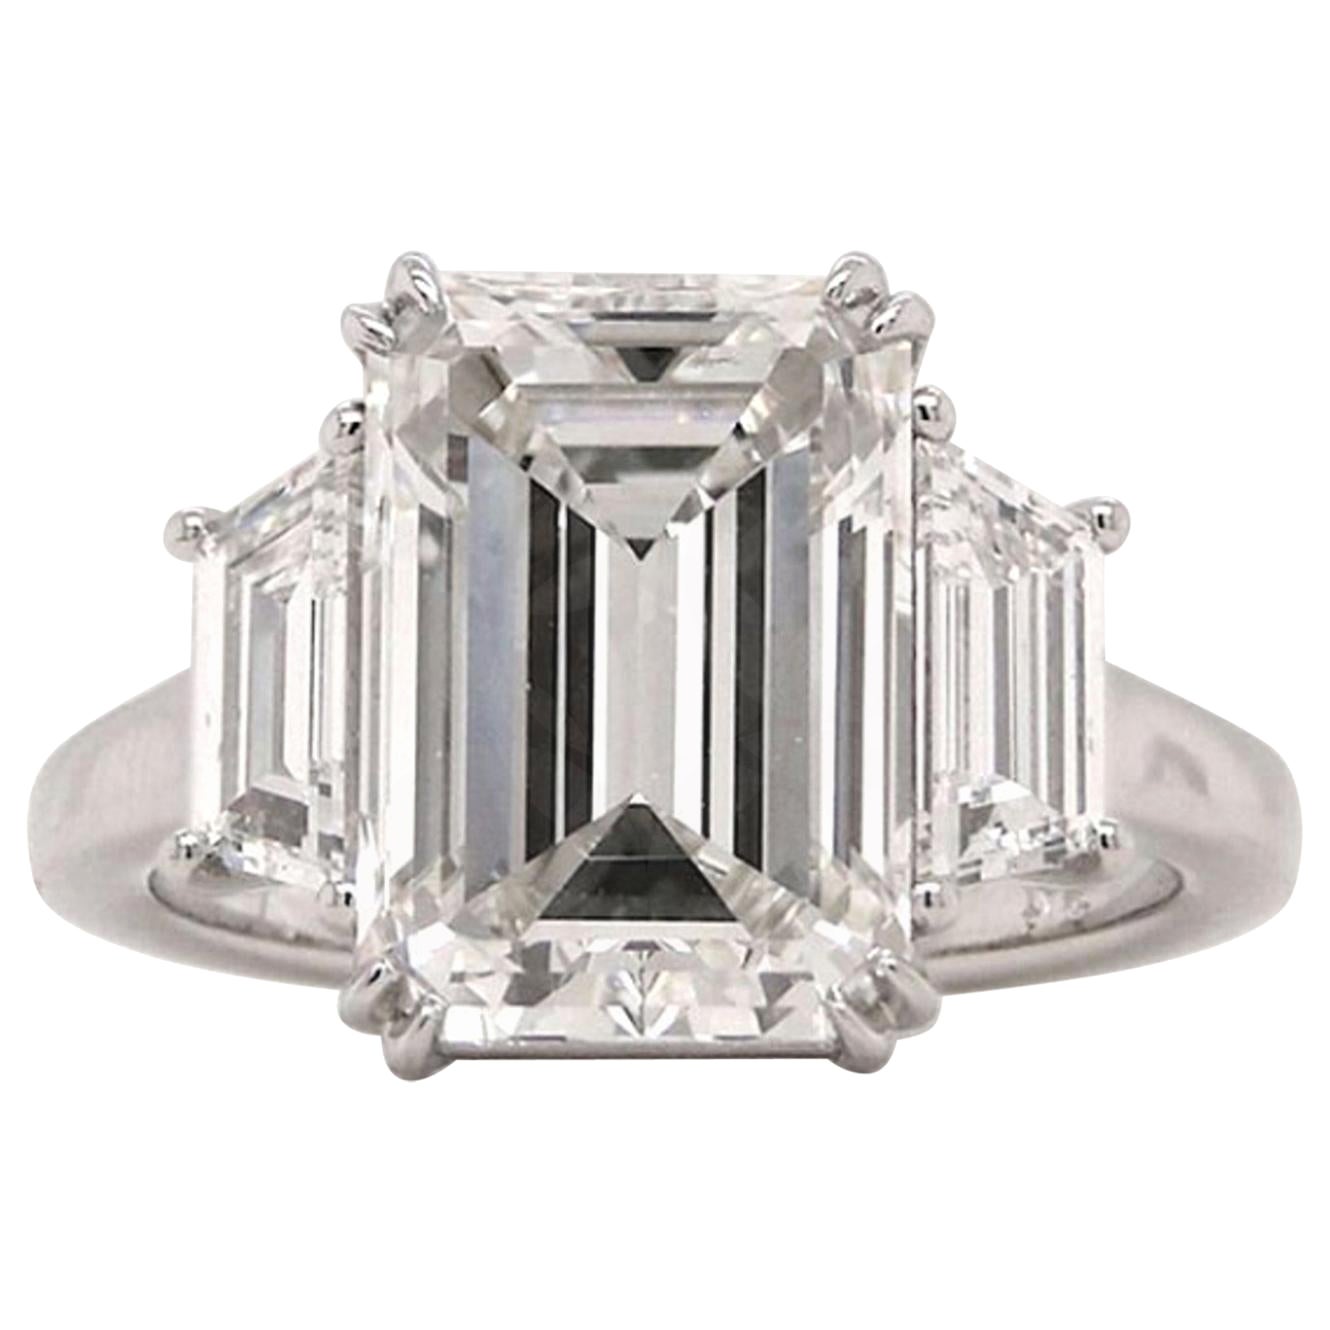 Exceptional GIA Certified 4 Carat Excellent Cut Emerald Cut Diamond Ring For Sale